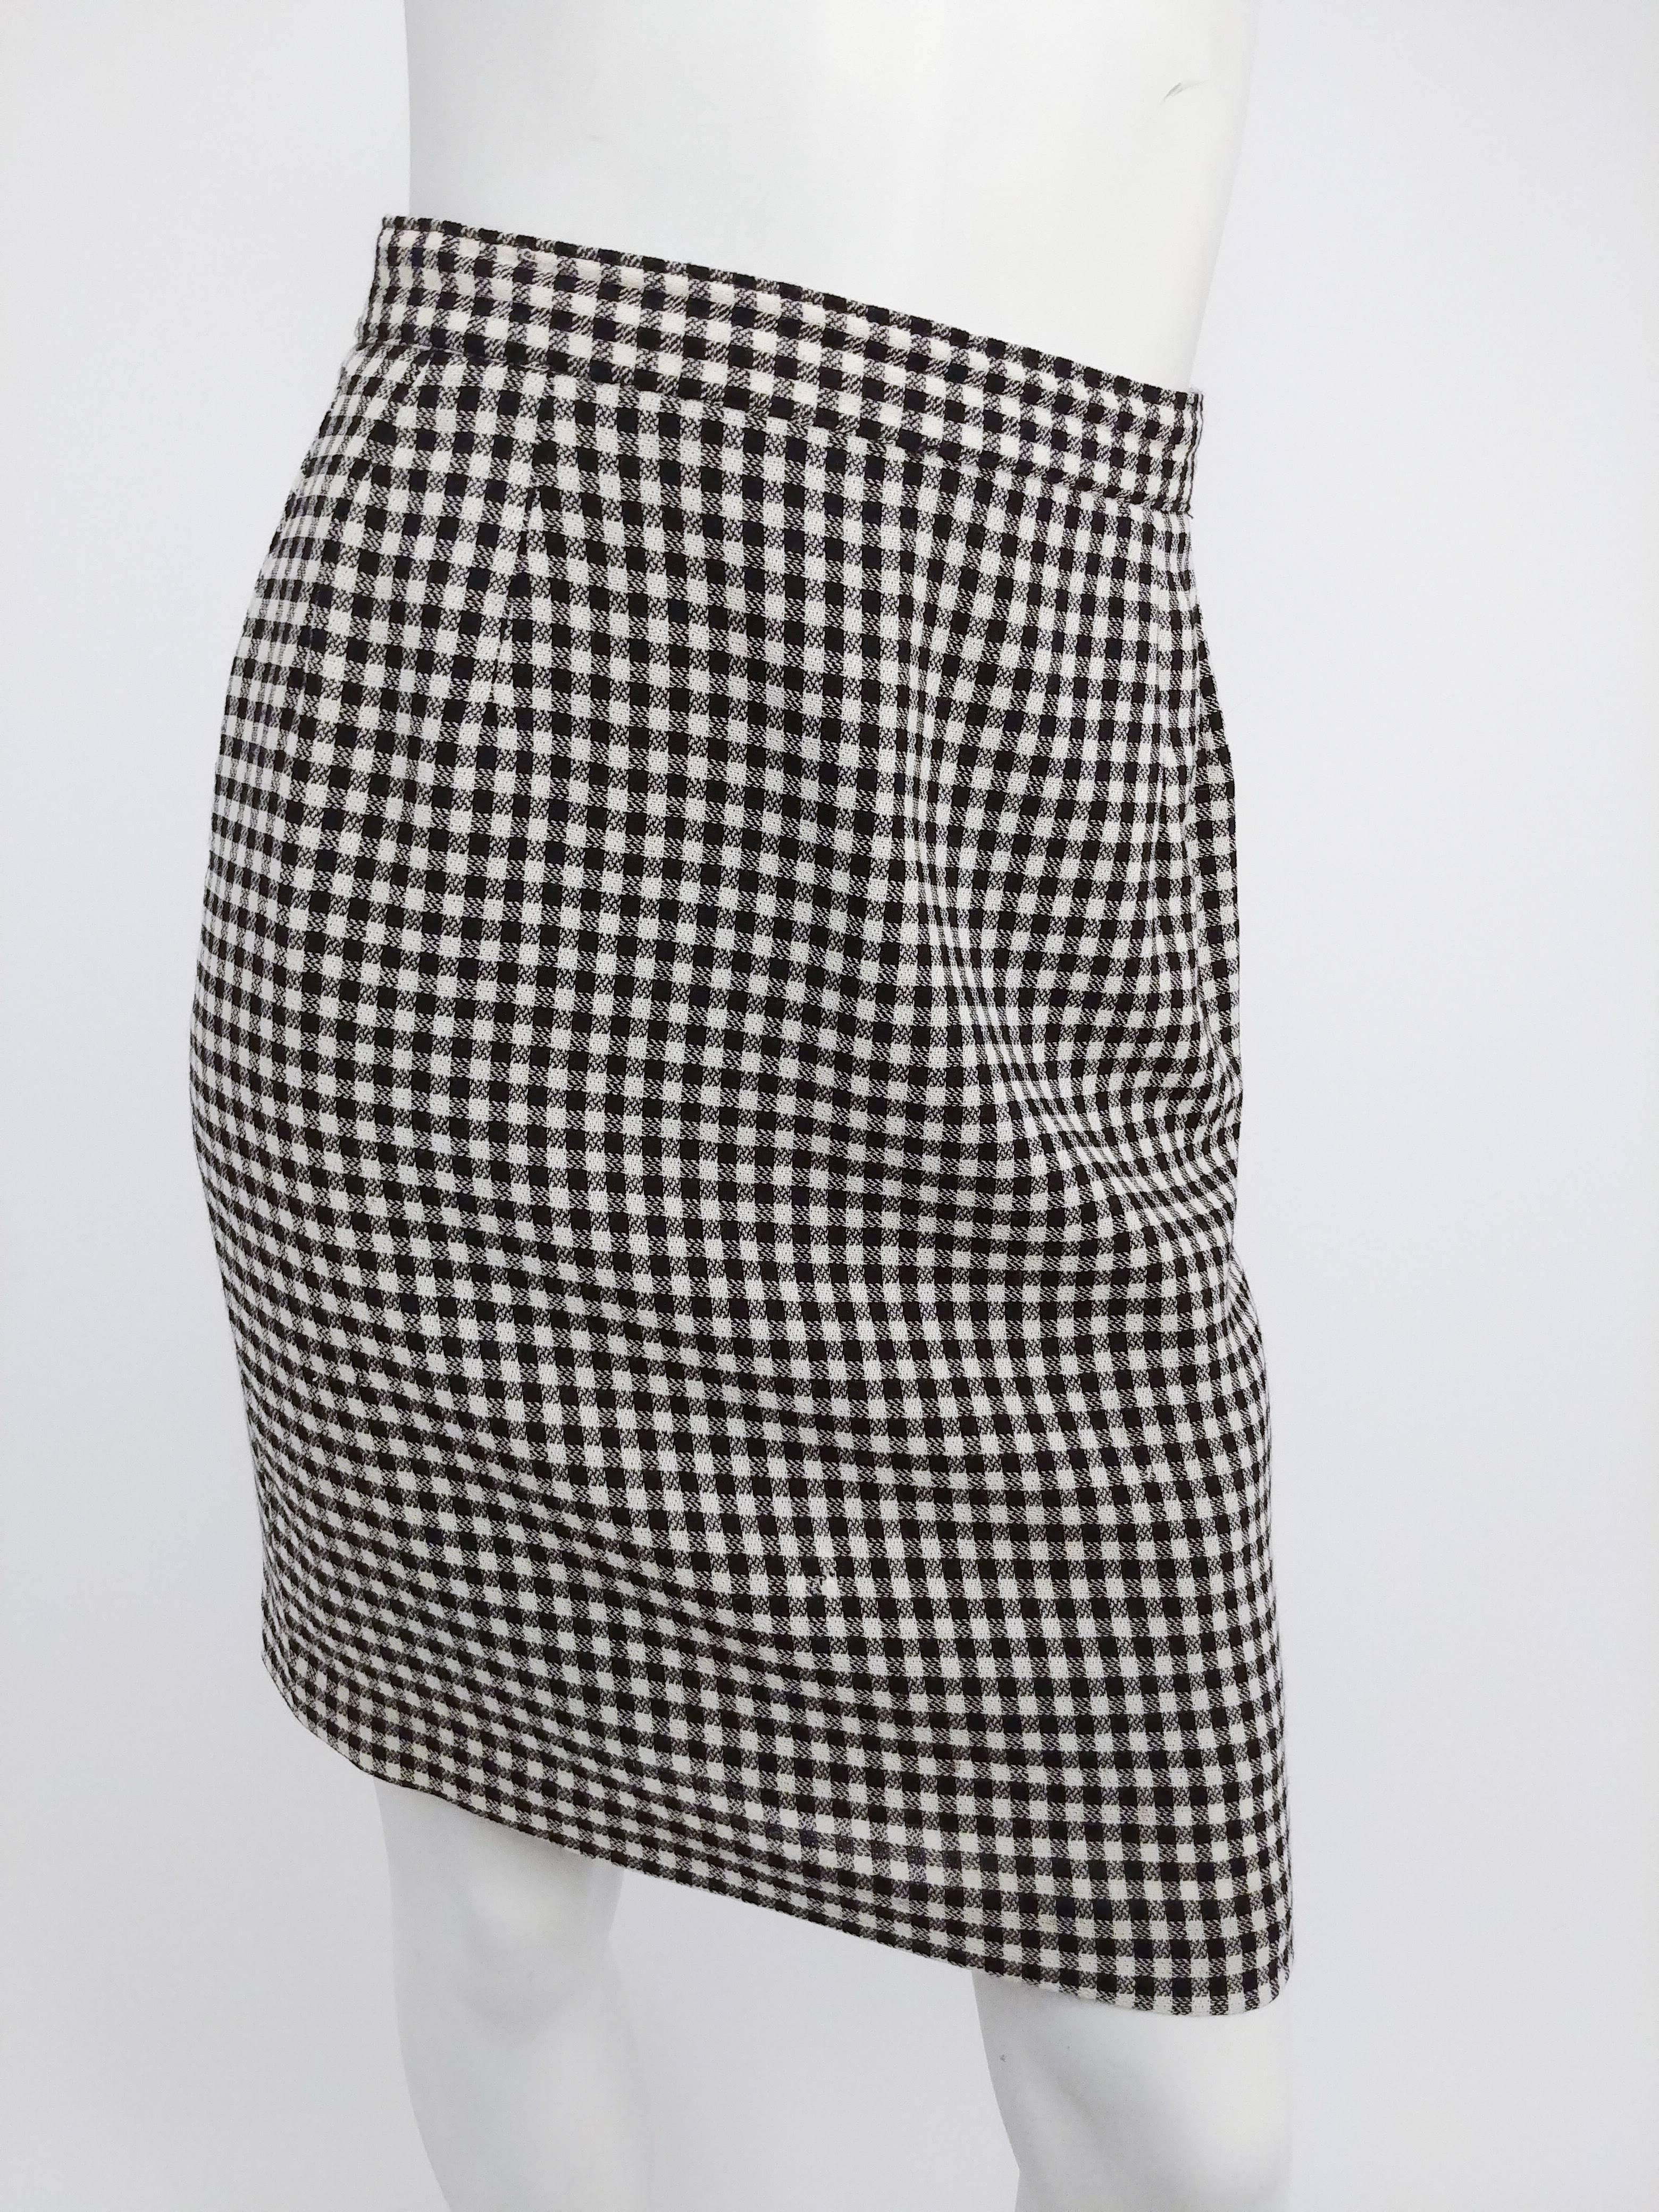 1960s Black & White Gingham Mod Skirt Suit. Large eye-catching square buttons at front. Sleeves have black contrast trim up sides. High waisted skirt zips closed at side. 